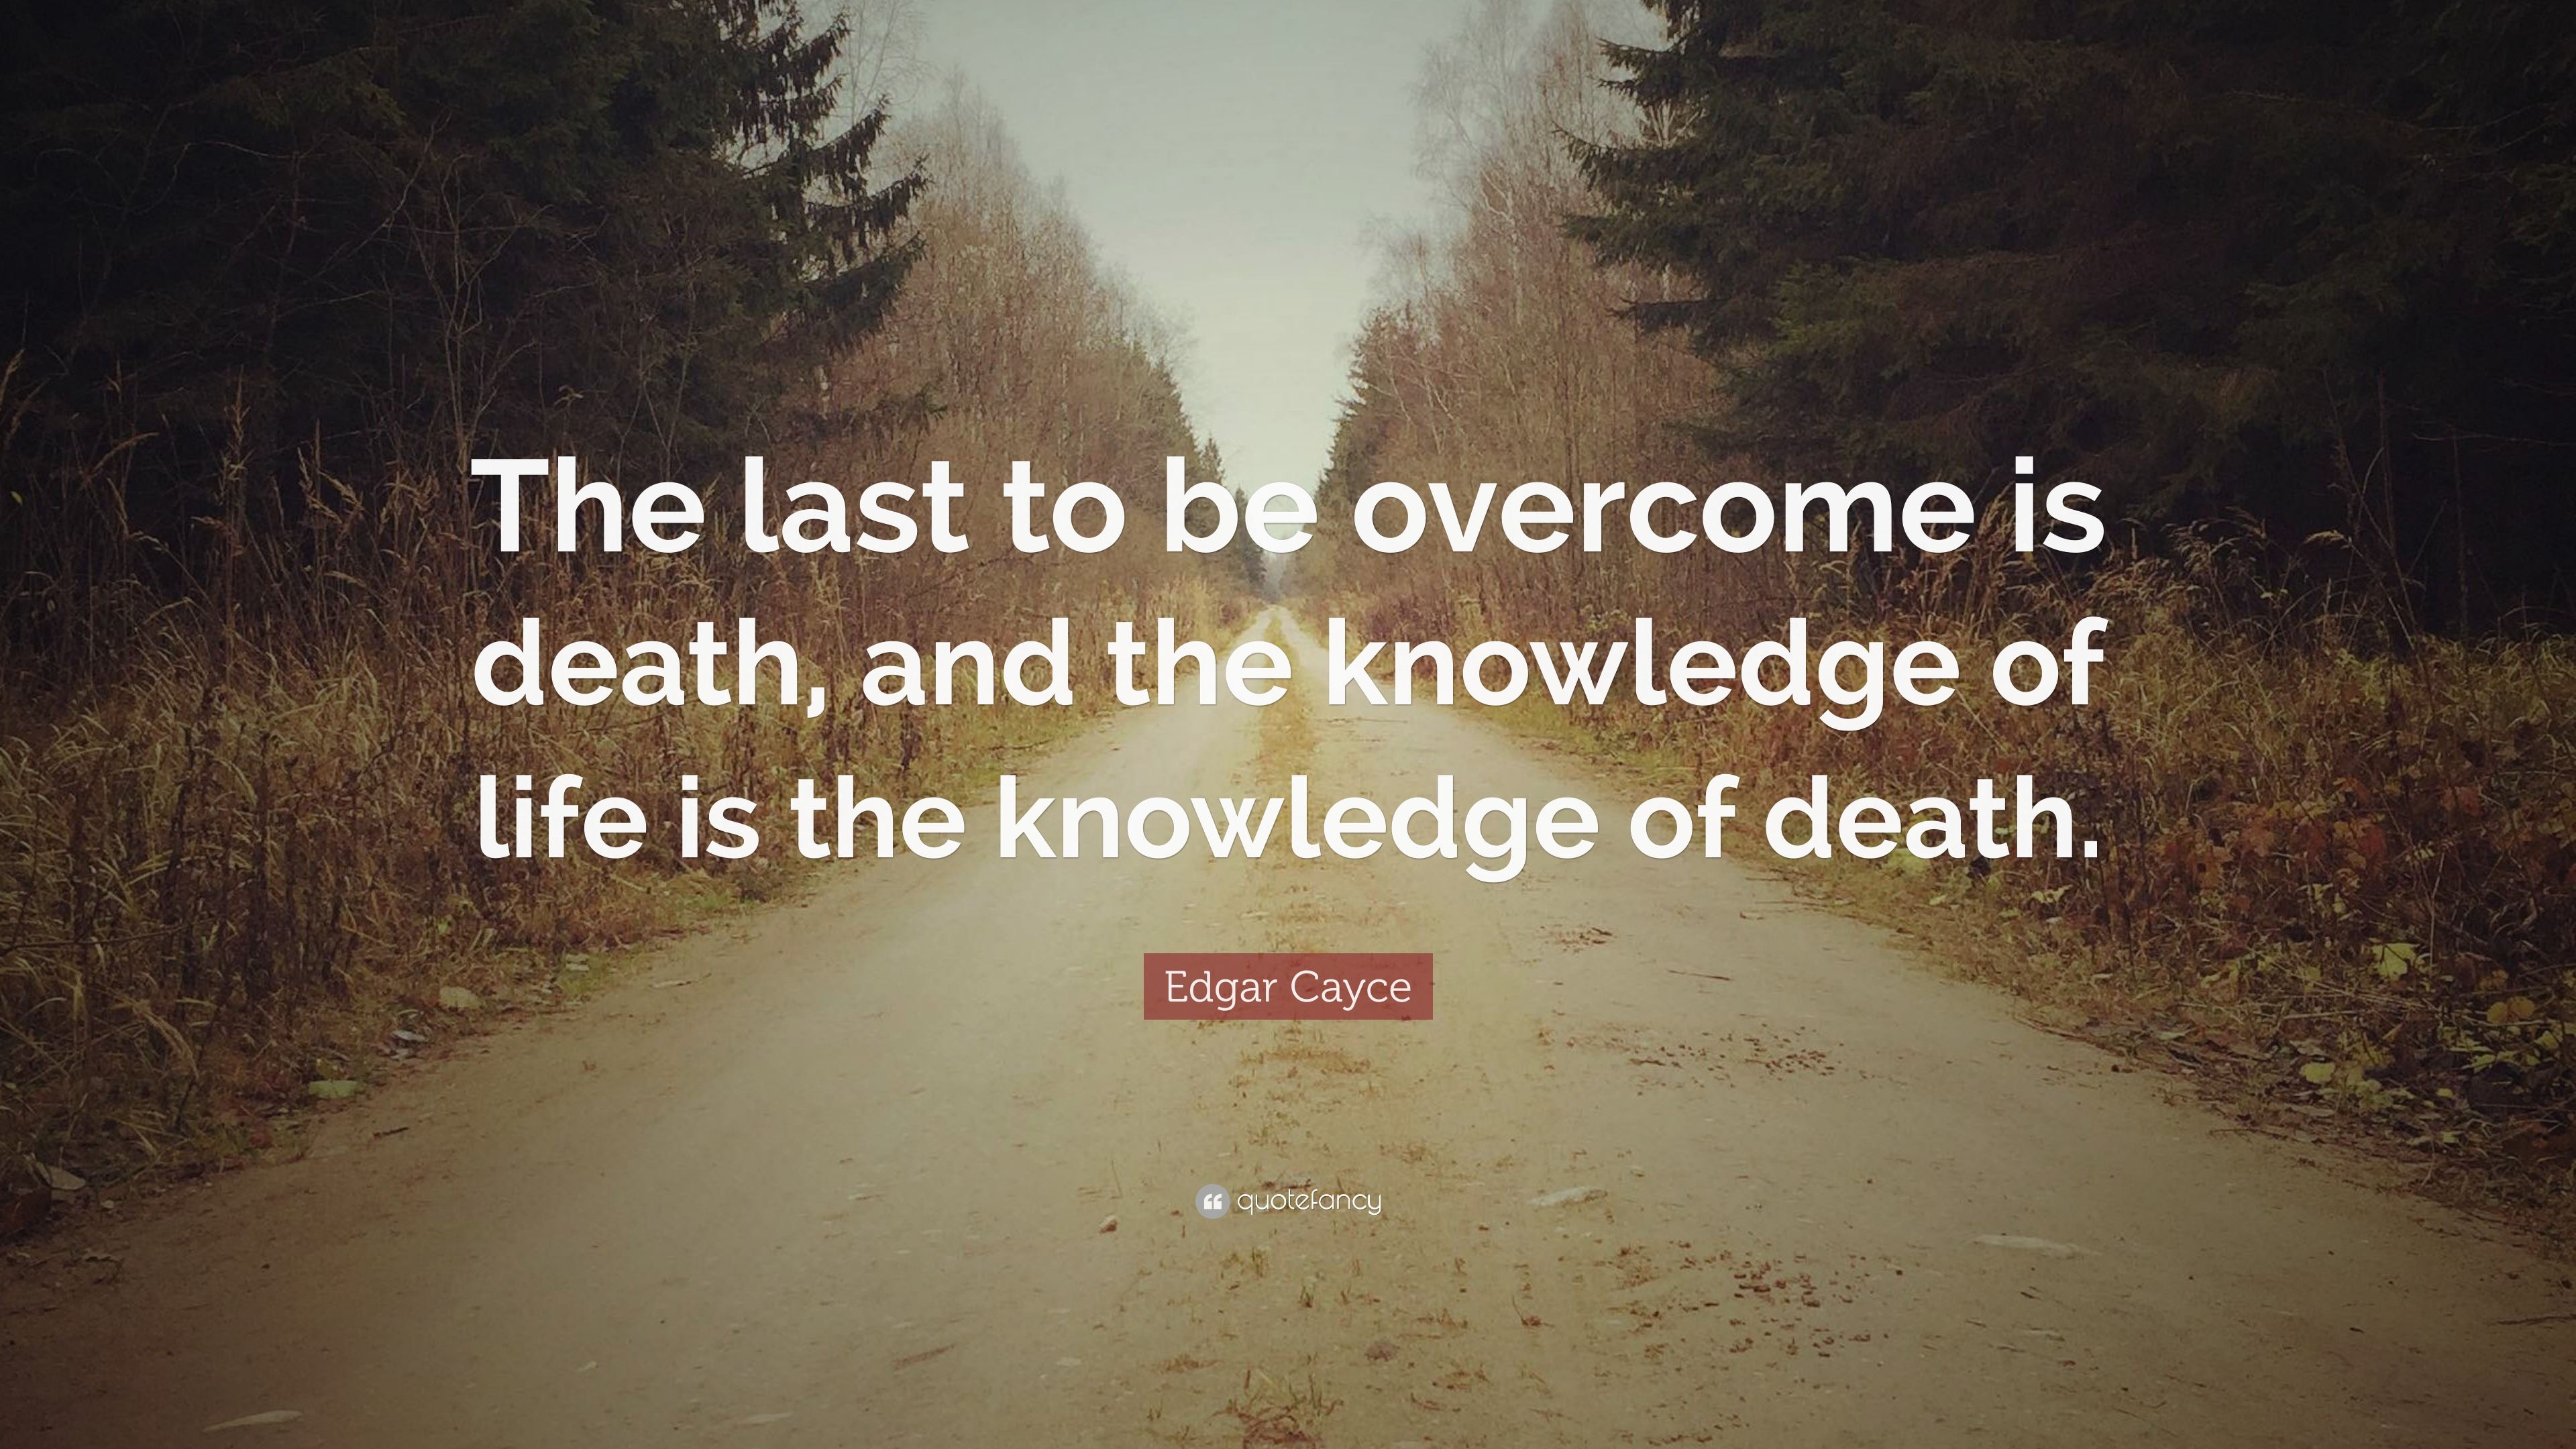 Edgar Cayce Quote: “The last to be overcome is death, and the knowledge ...